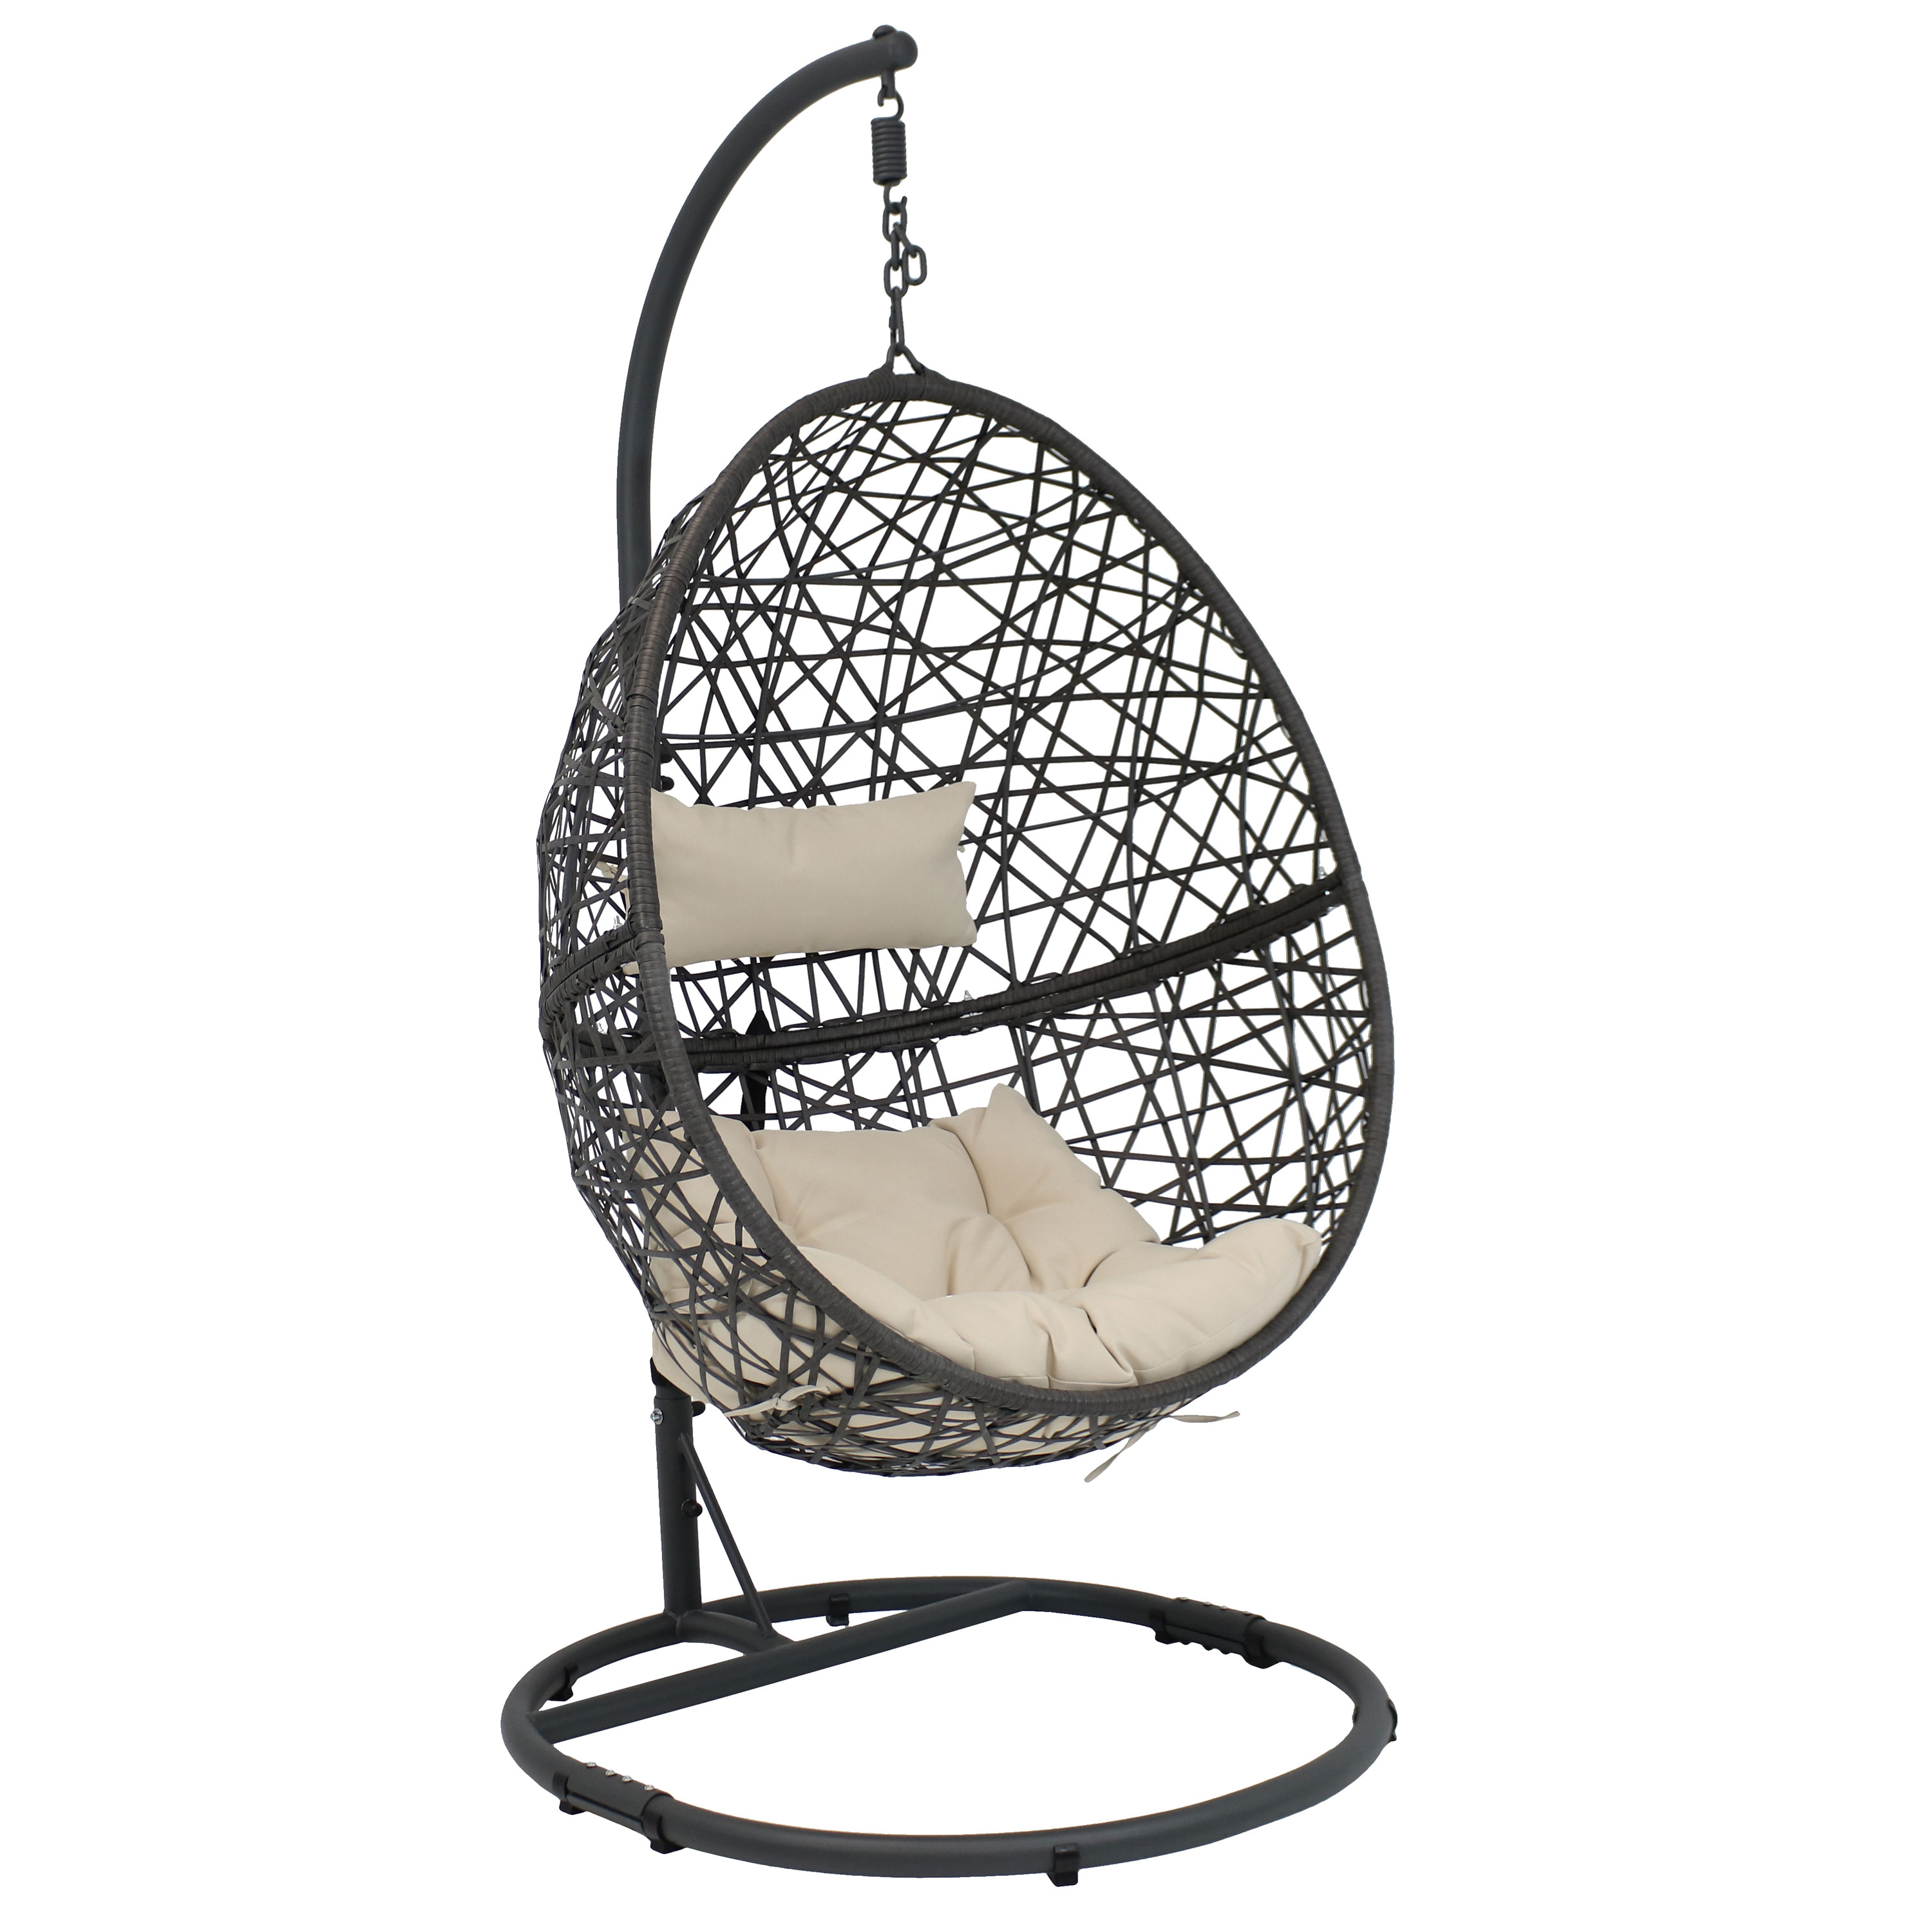 Sunnydaze Caroline Hanging Egg Chair with Steel Stand Set, Resin Wicker, Modern Design, Outdoor Use, Includes Cushion, Beige